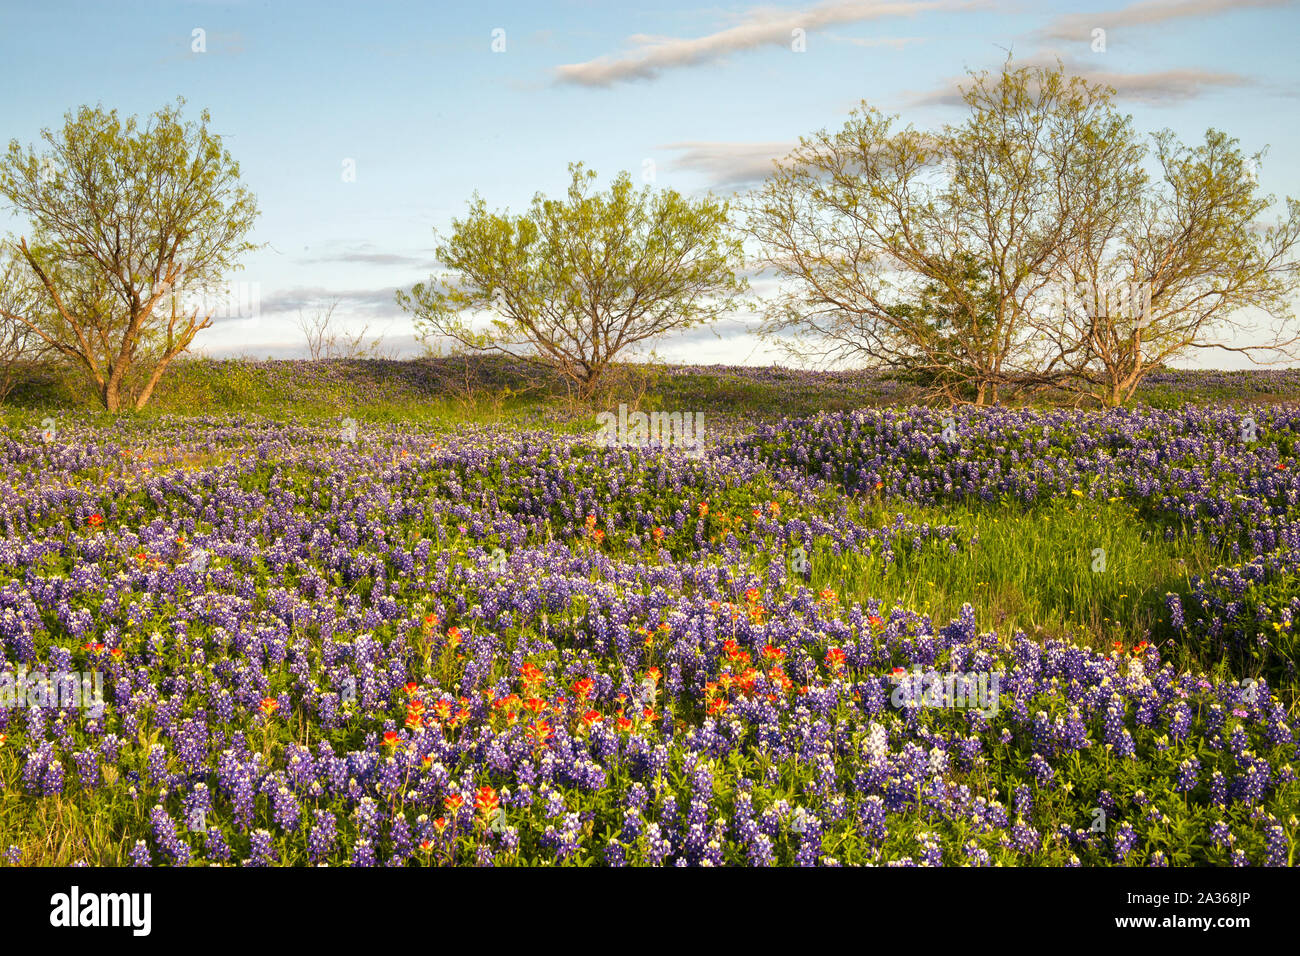 Field of Bluebonnets and Paintbrush, Mach Road, Near Ennis, Texas Stock Photo